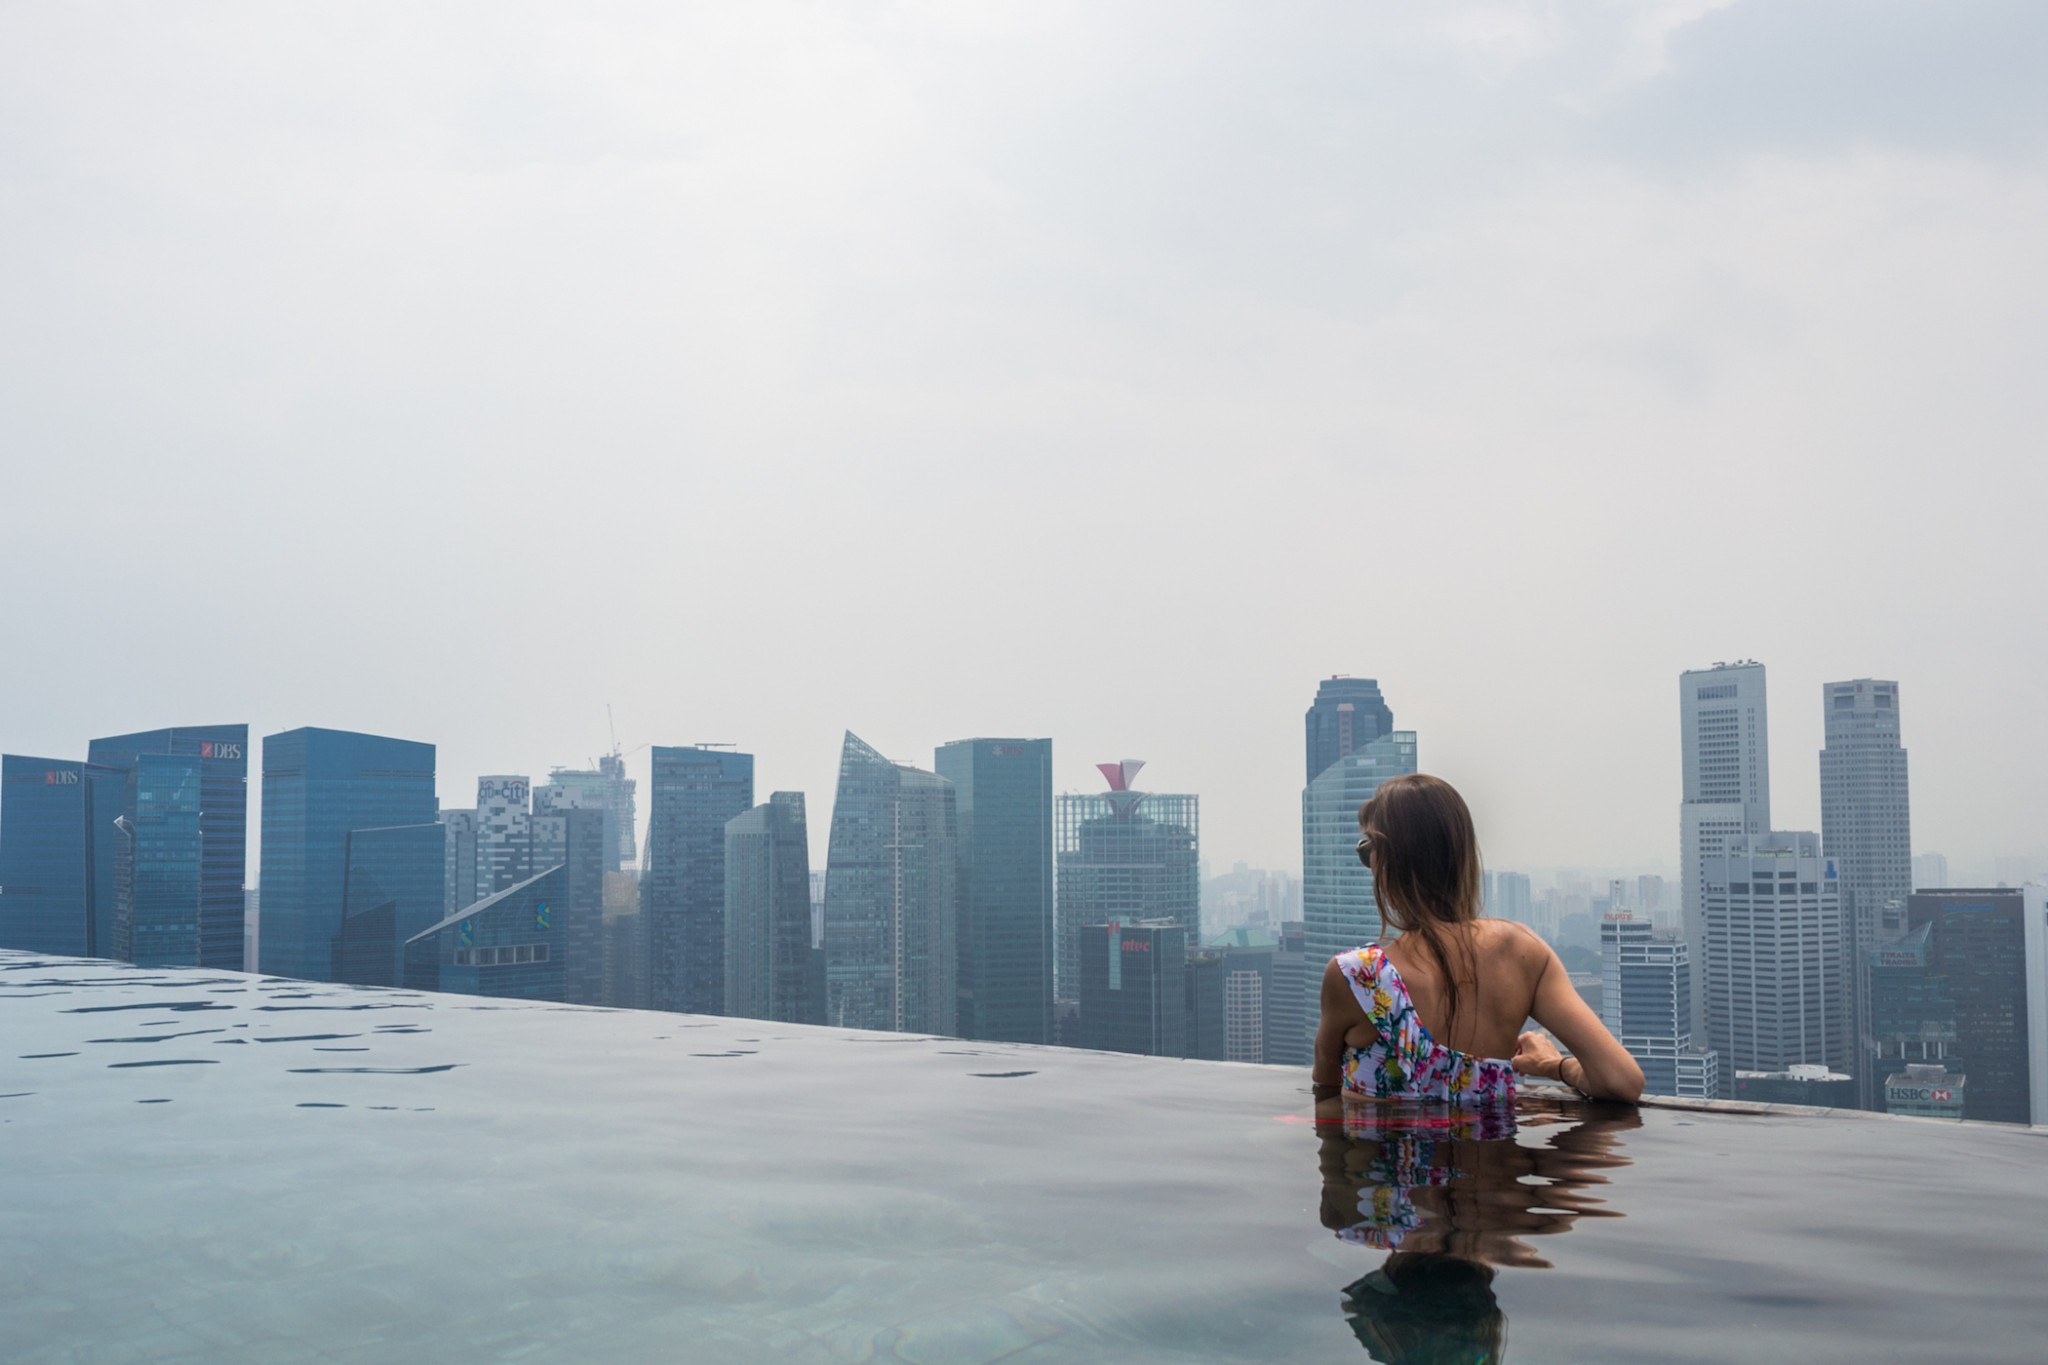 The infinity pool at the Marina Bay Sands hotel overlooking the Singapore skyline.